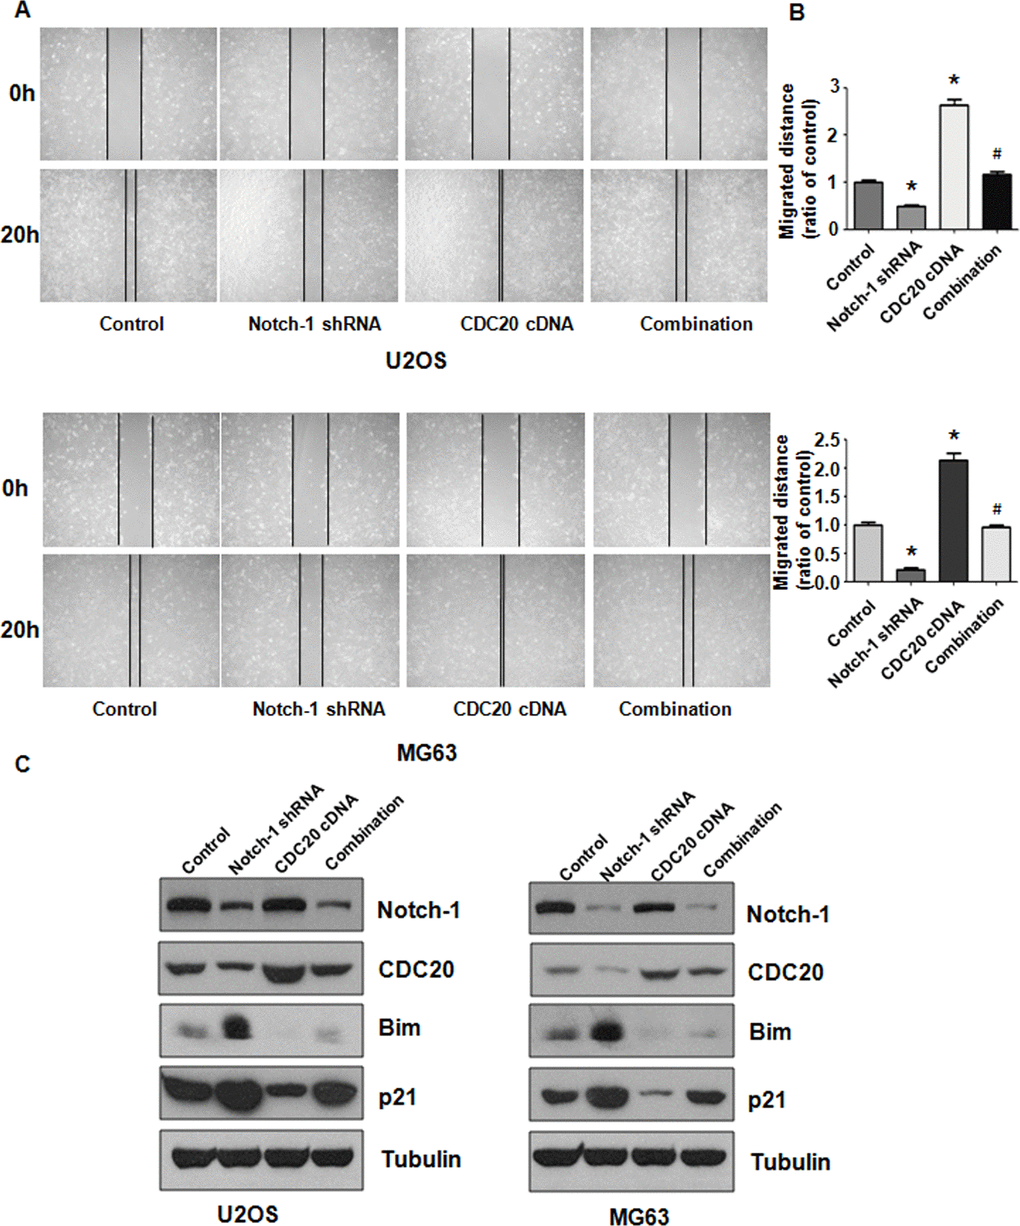 Cdc20 overexpression abolished shRNA-mediated Notch-1 suppression. (A) The wound healing assay showed that Cdc20 upregulation abolished Notch-1 downregulation-mediated suppression of viability. (B) Quantification of the migration analysis results. *P # P C) Western blot results showing Notch-1, Cdc20, Bim and p21 expression.